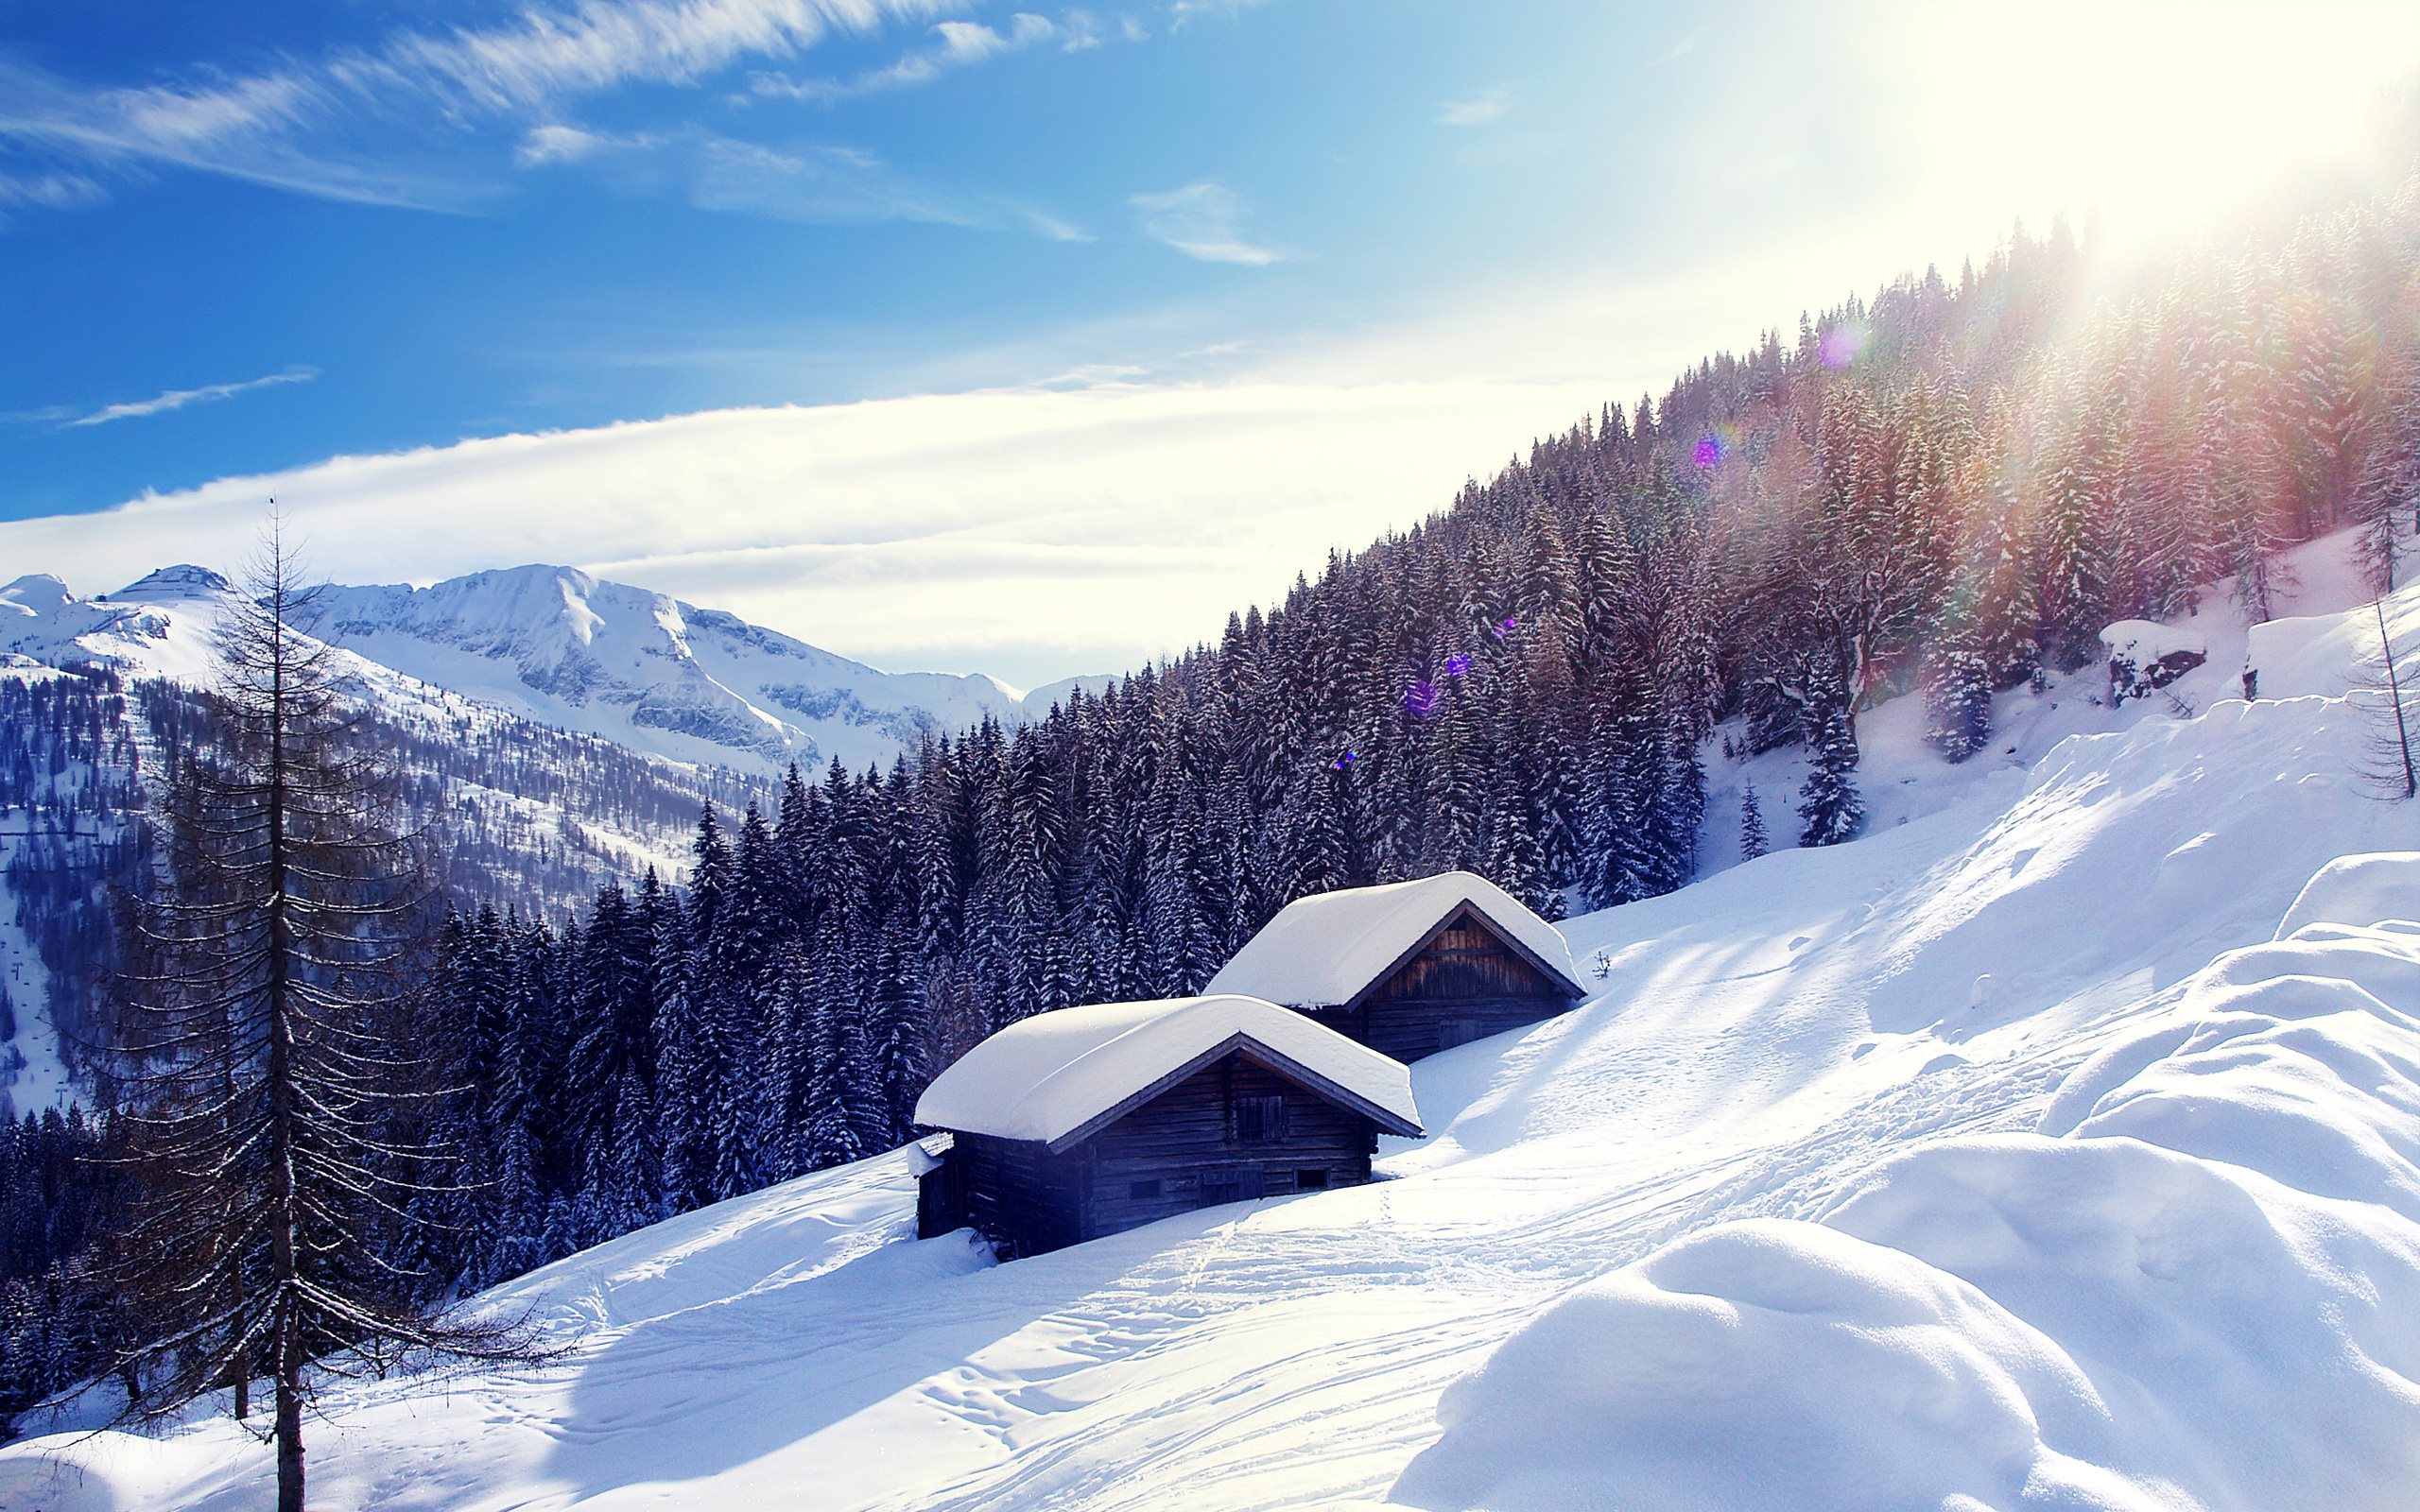 Download Wallpapers Alps Mountains Winter Snow Hut Austria For Desktop With Resolution 2560x1600 High Quality Hd Pictures Wallpapers